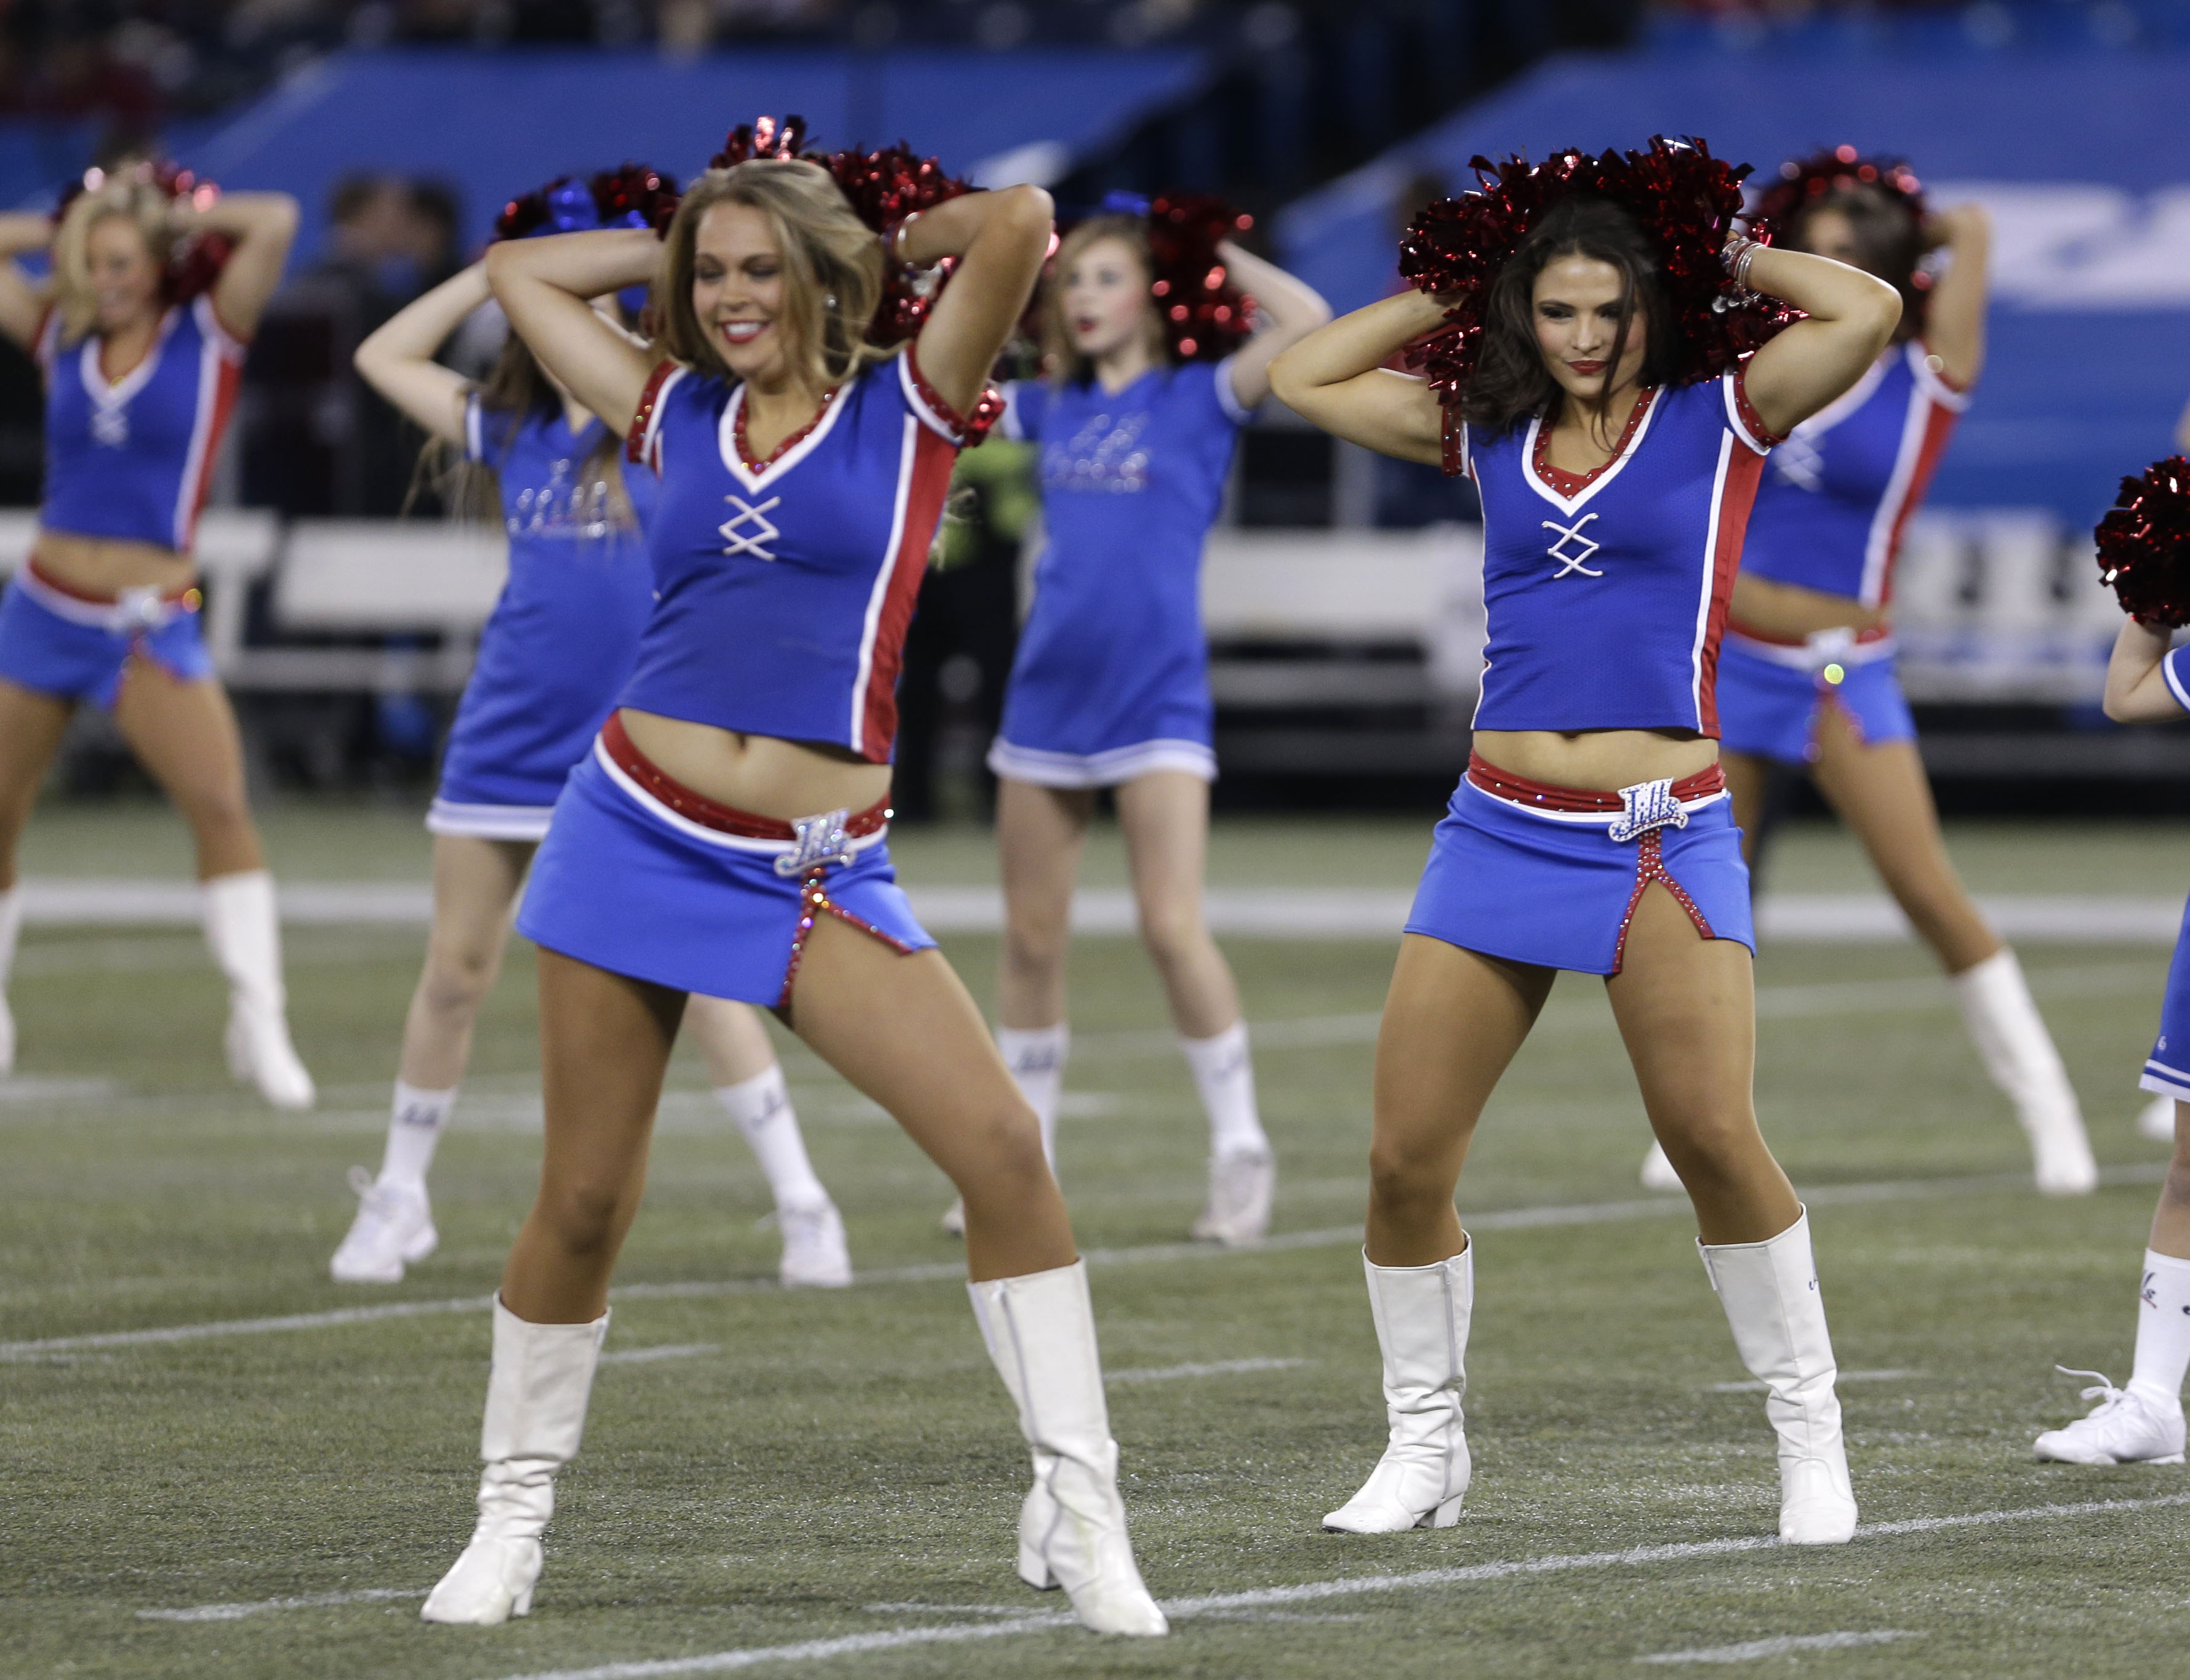 NFL cheerleaders go out with a bang in Week 17 – New York Daily News